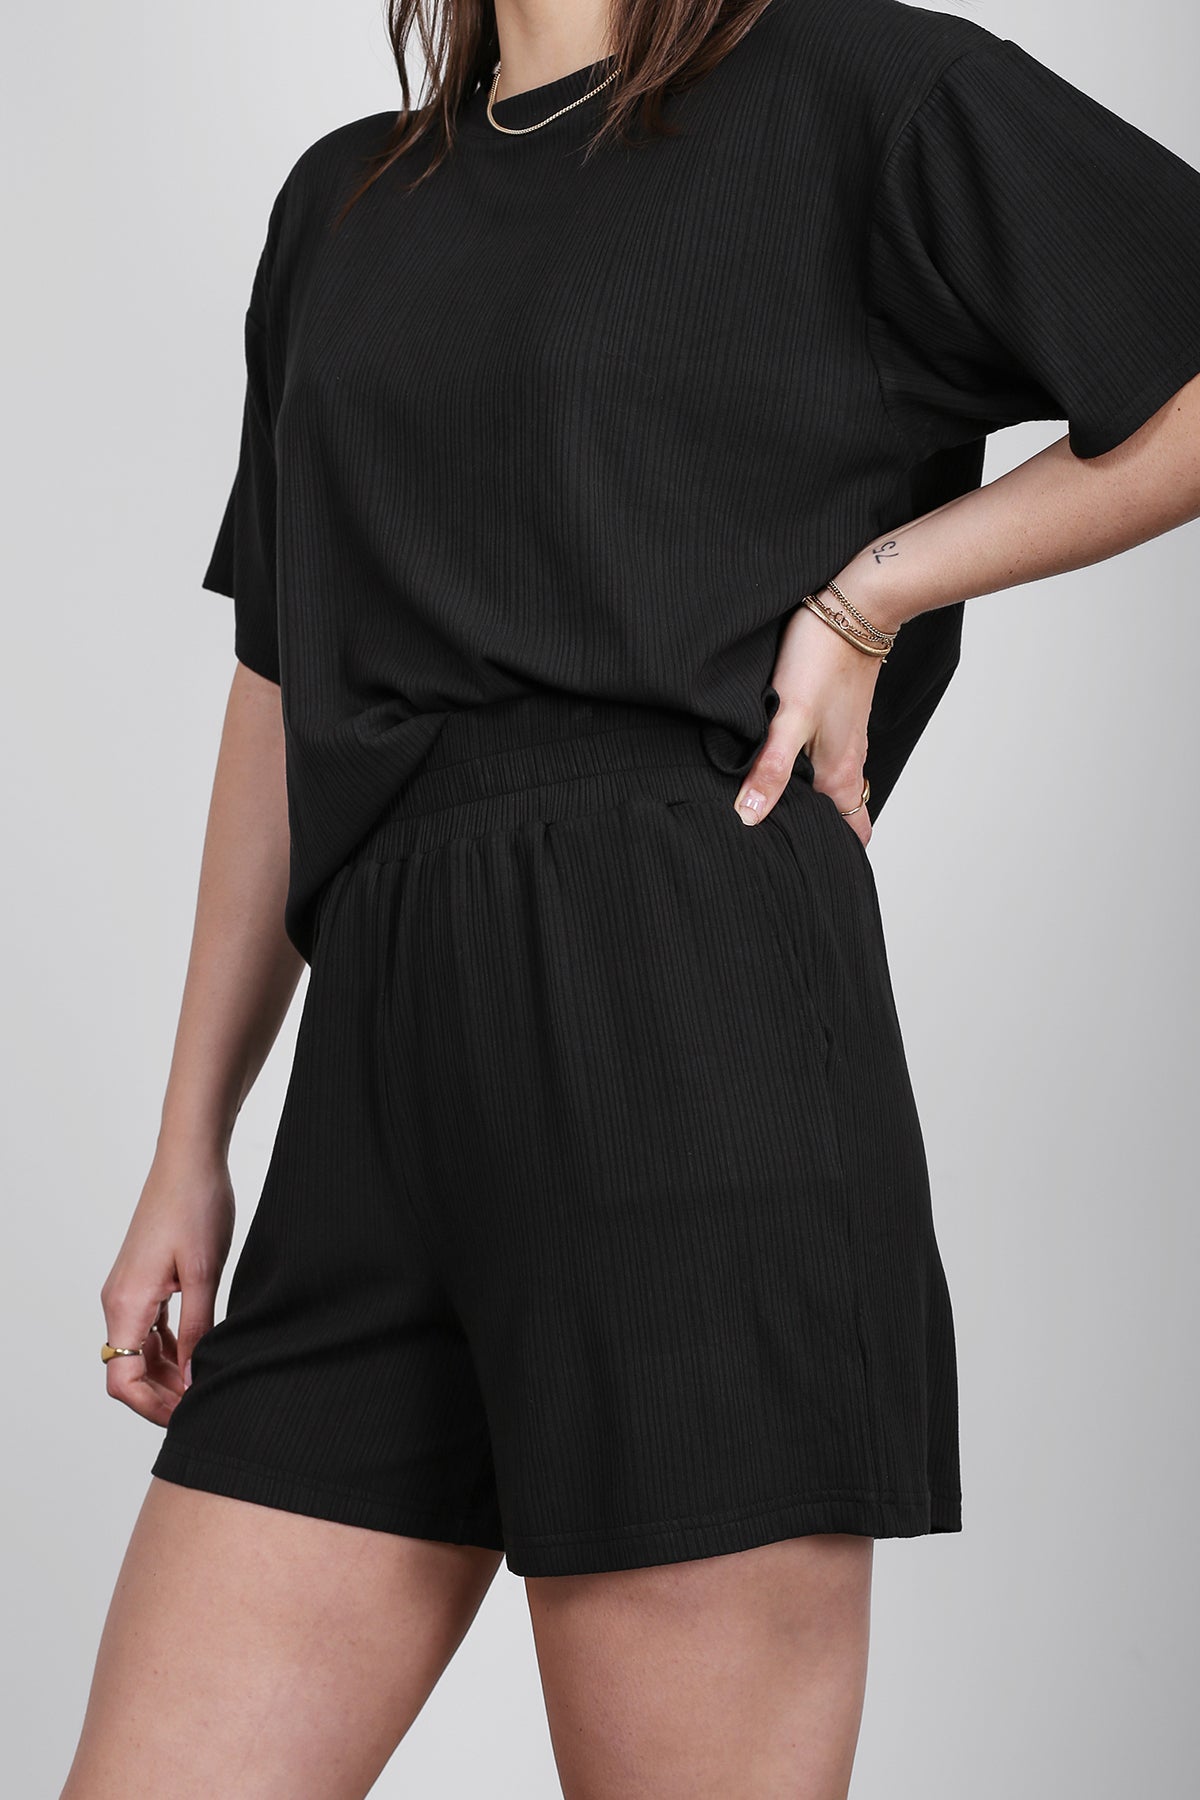 RIBBED BOXY TEE IN BLACK